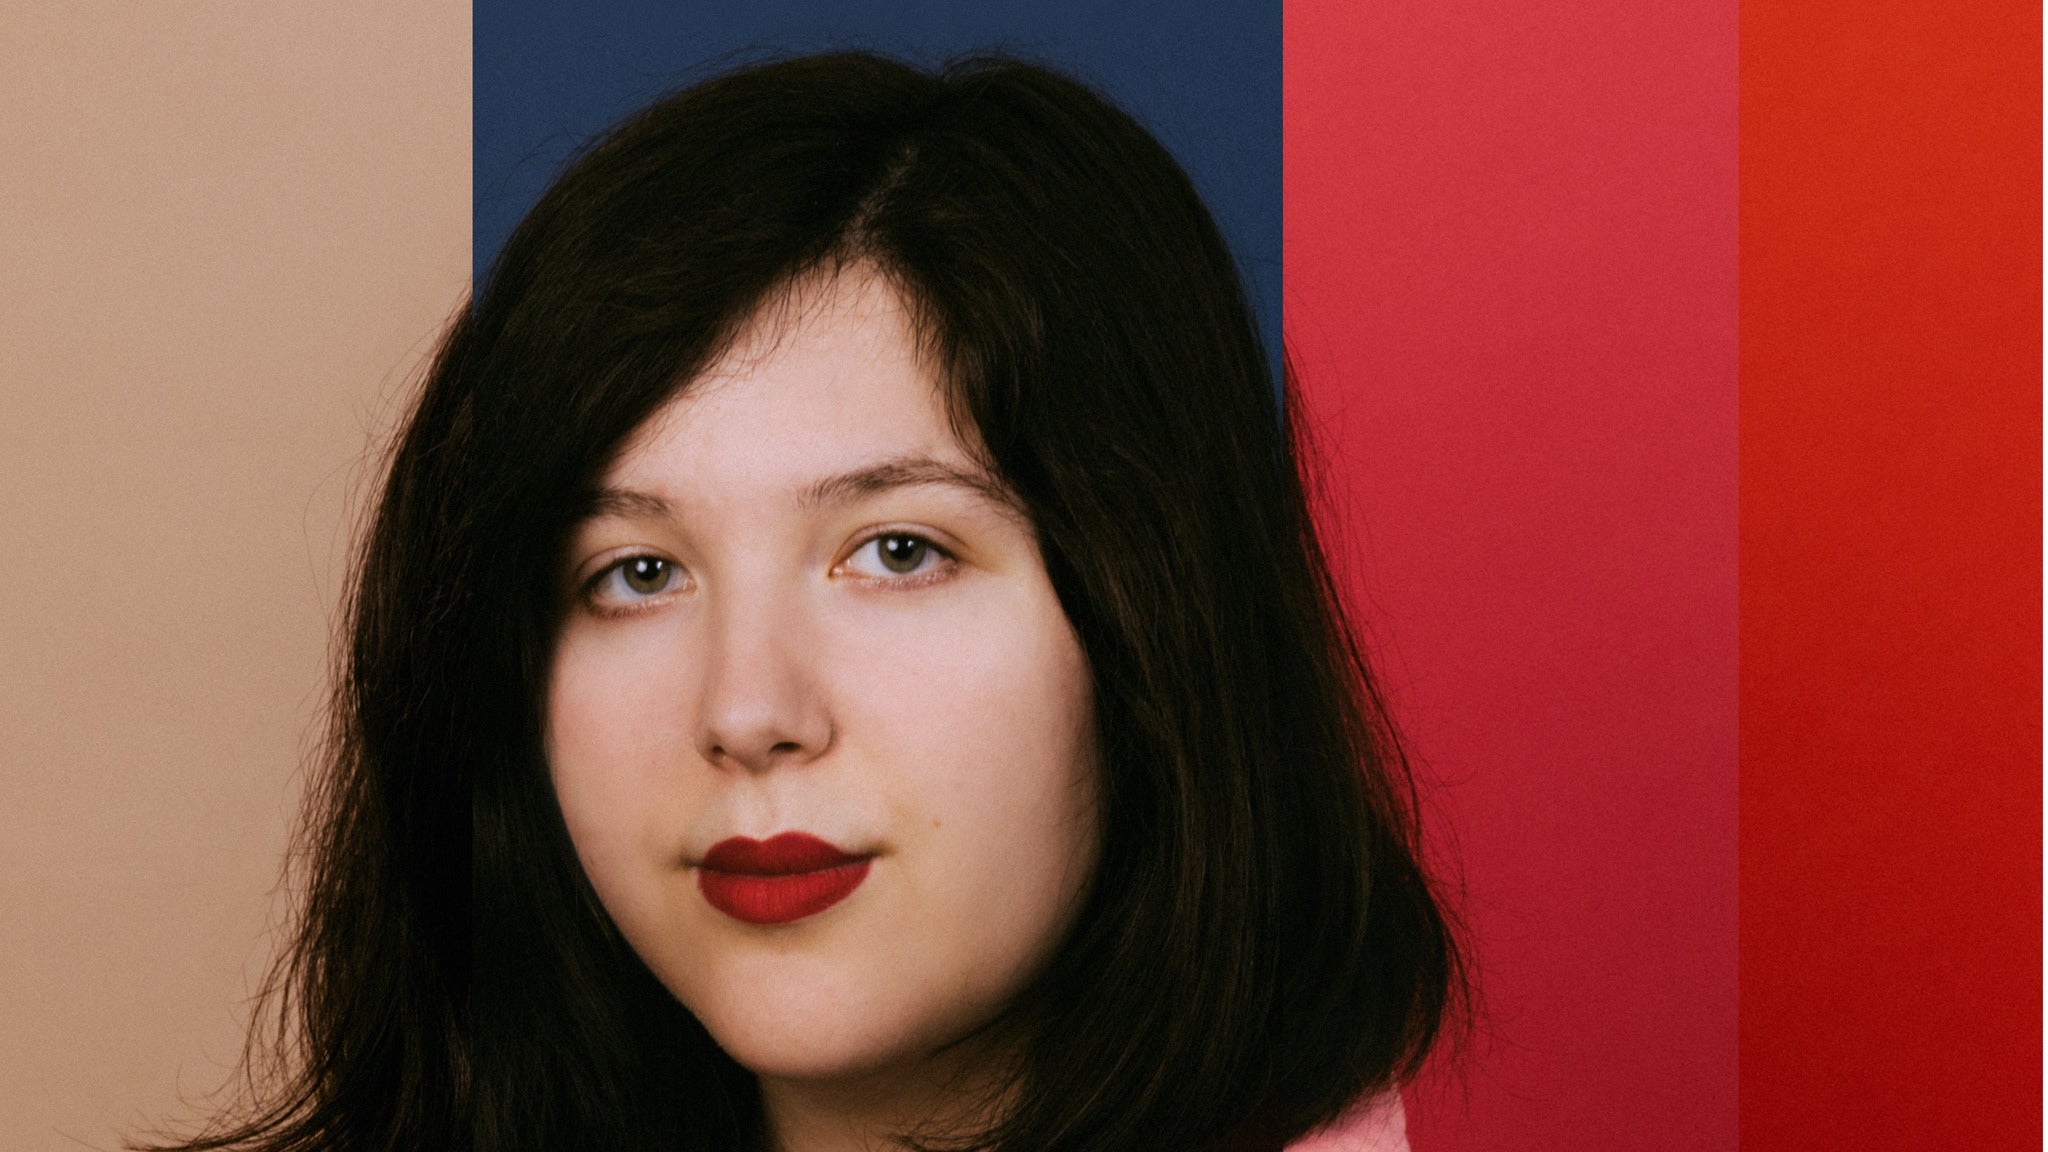 Lucy Dacus in New York promo photo for Amex presale offer code